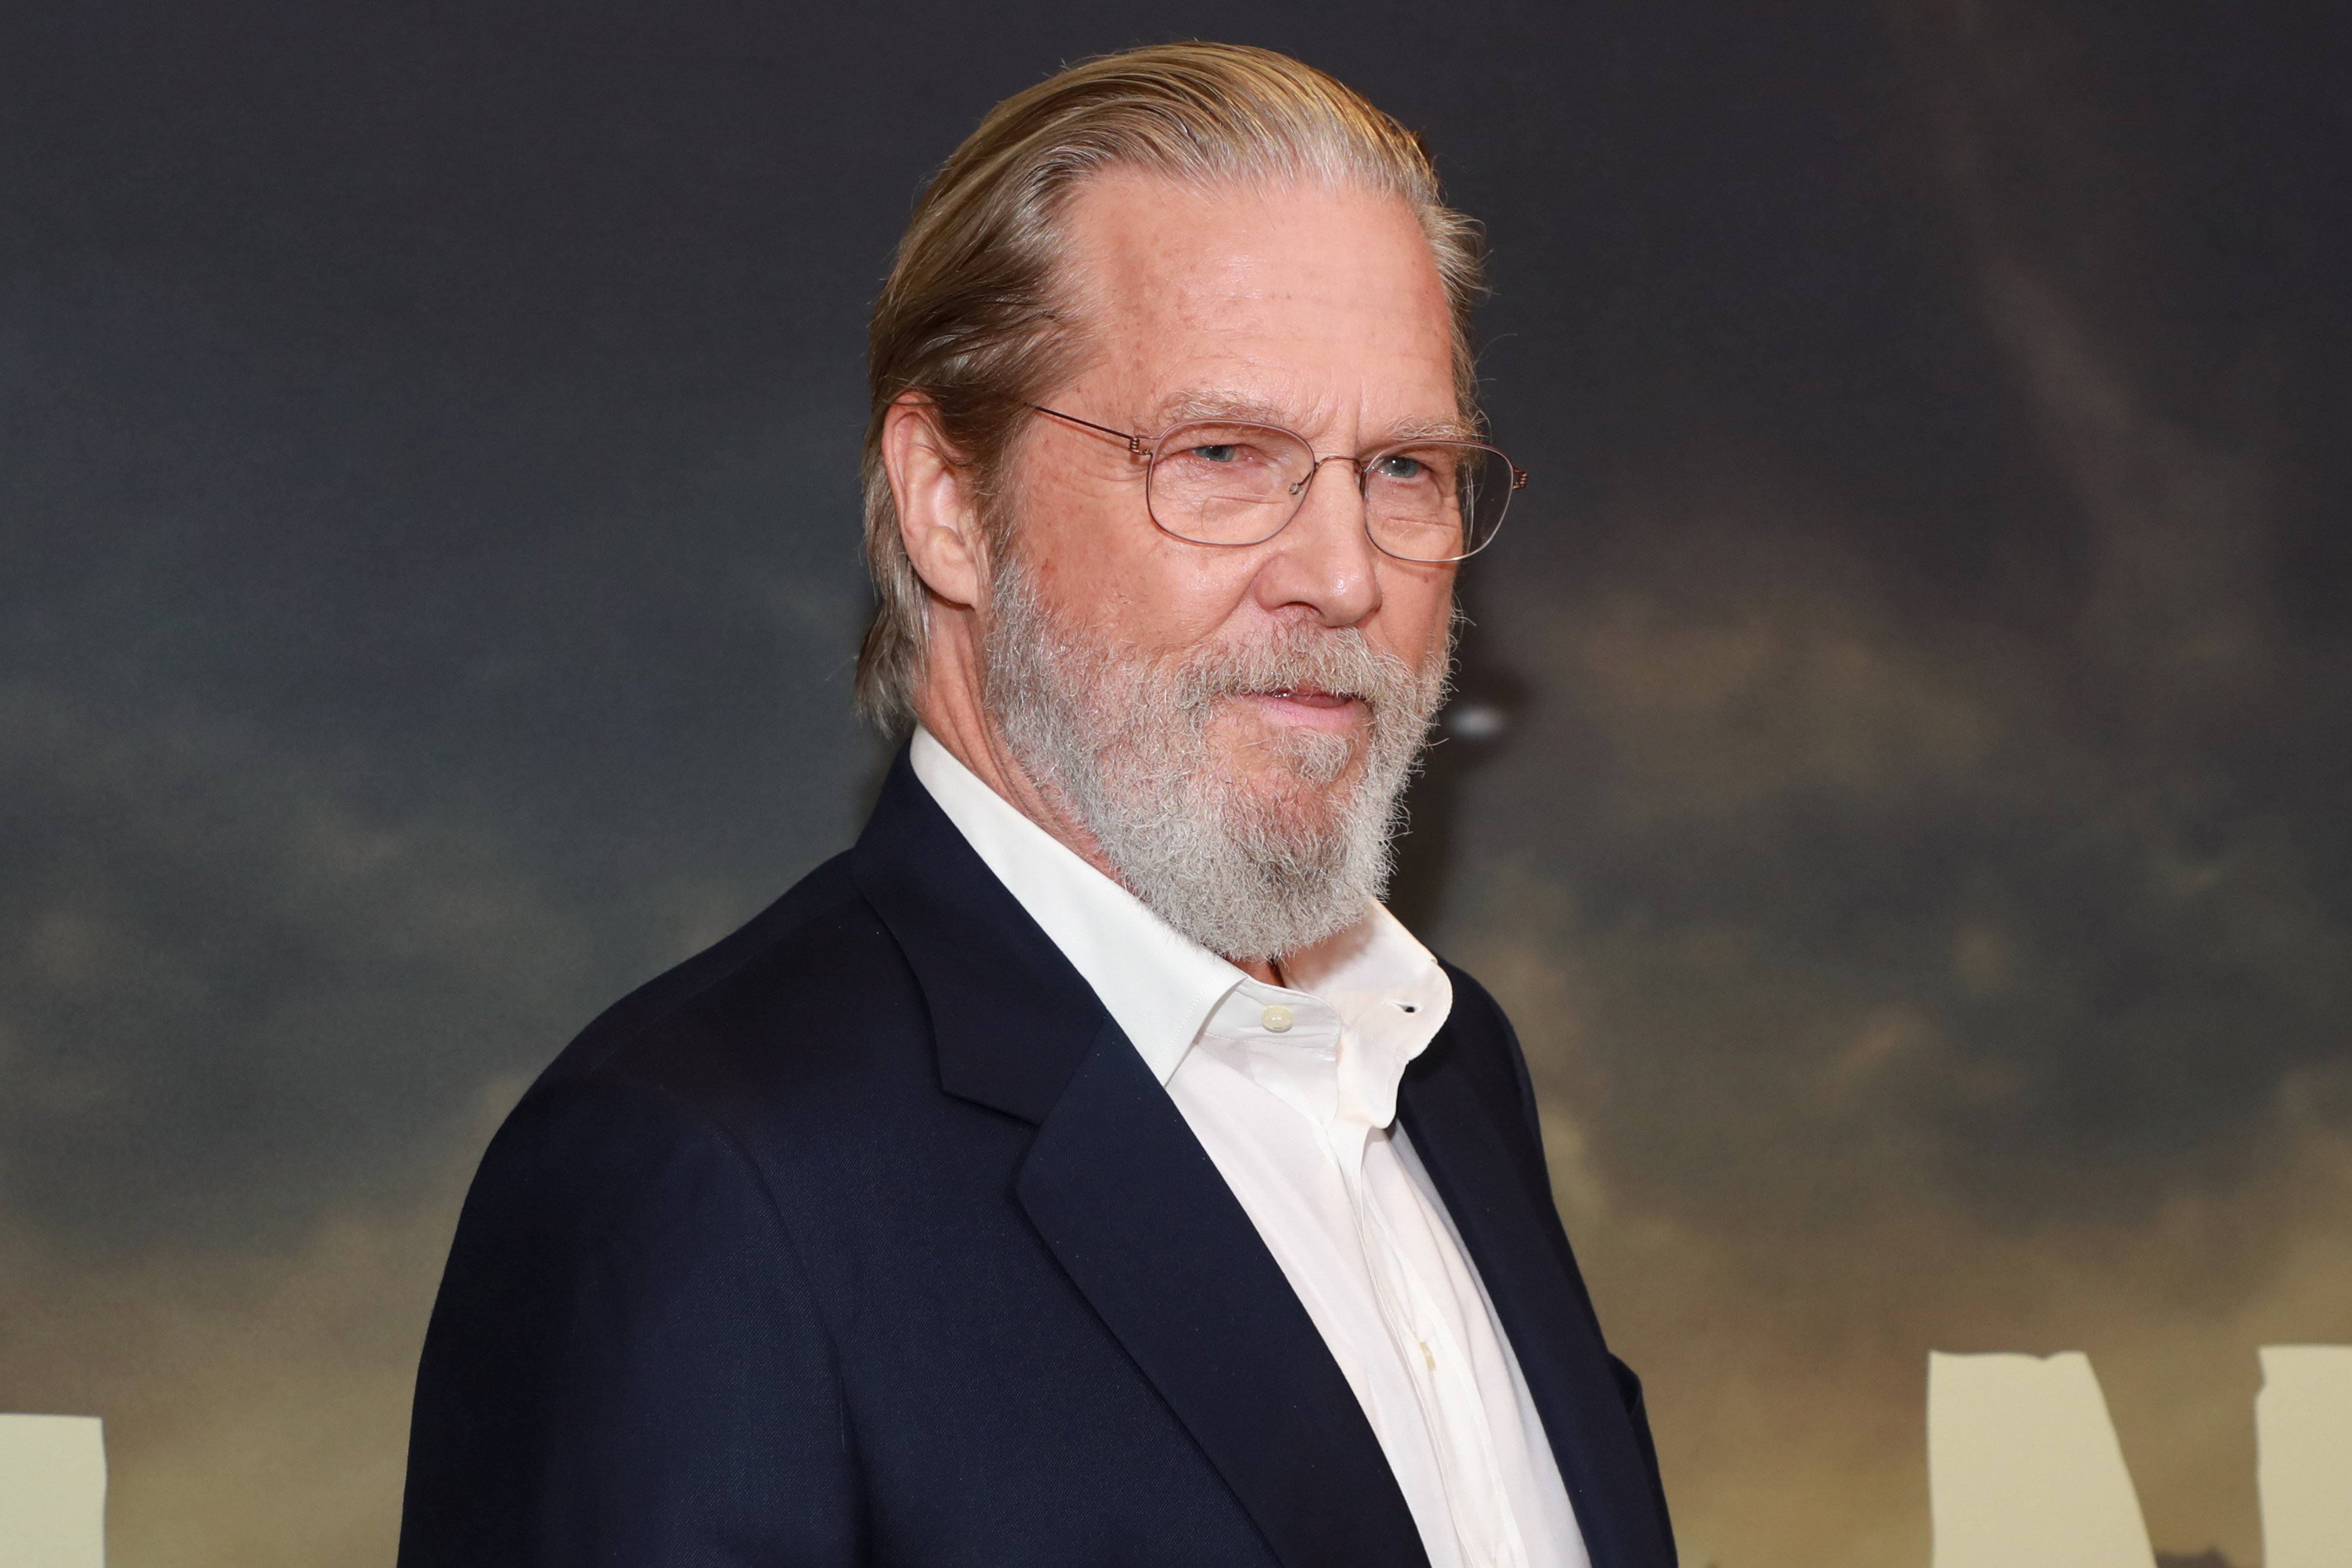 Jeff Bridges attends "The Old Man" season 1 NYC Tastemaker Event at MOMA on June 14, 2022 in New York City. | Source: Getty Images